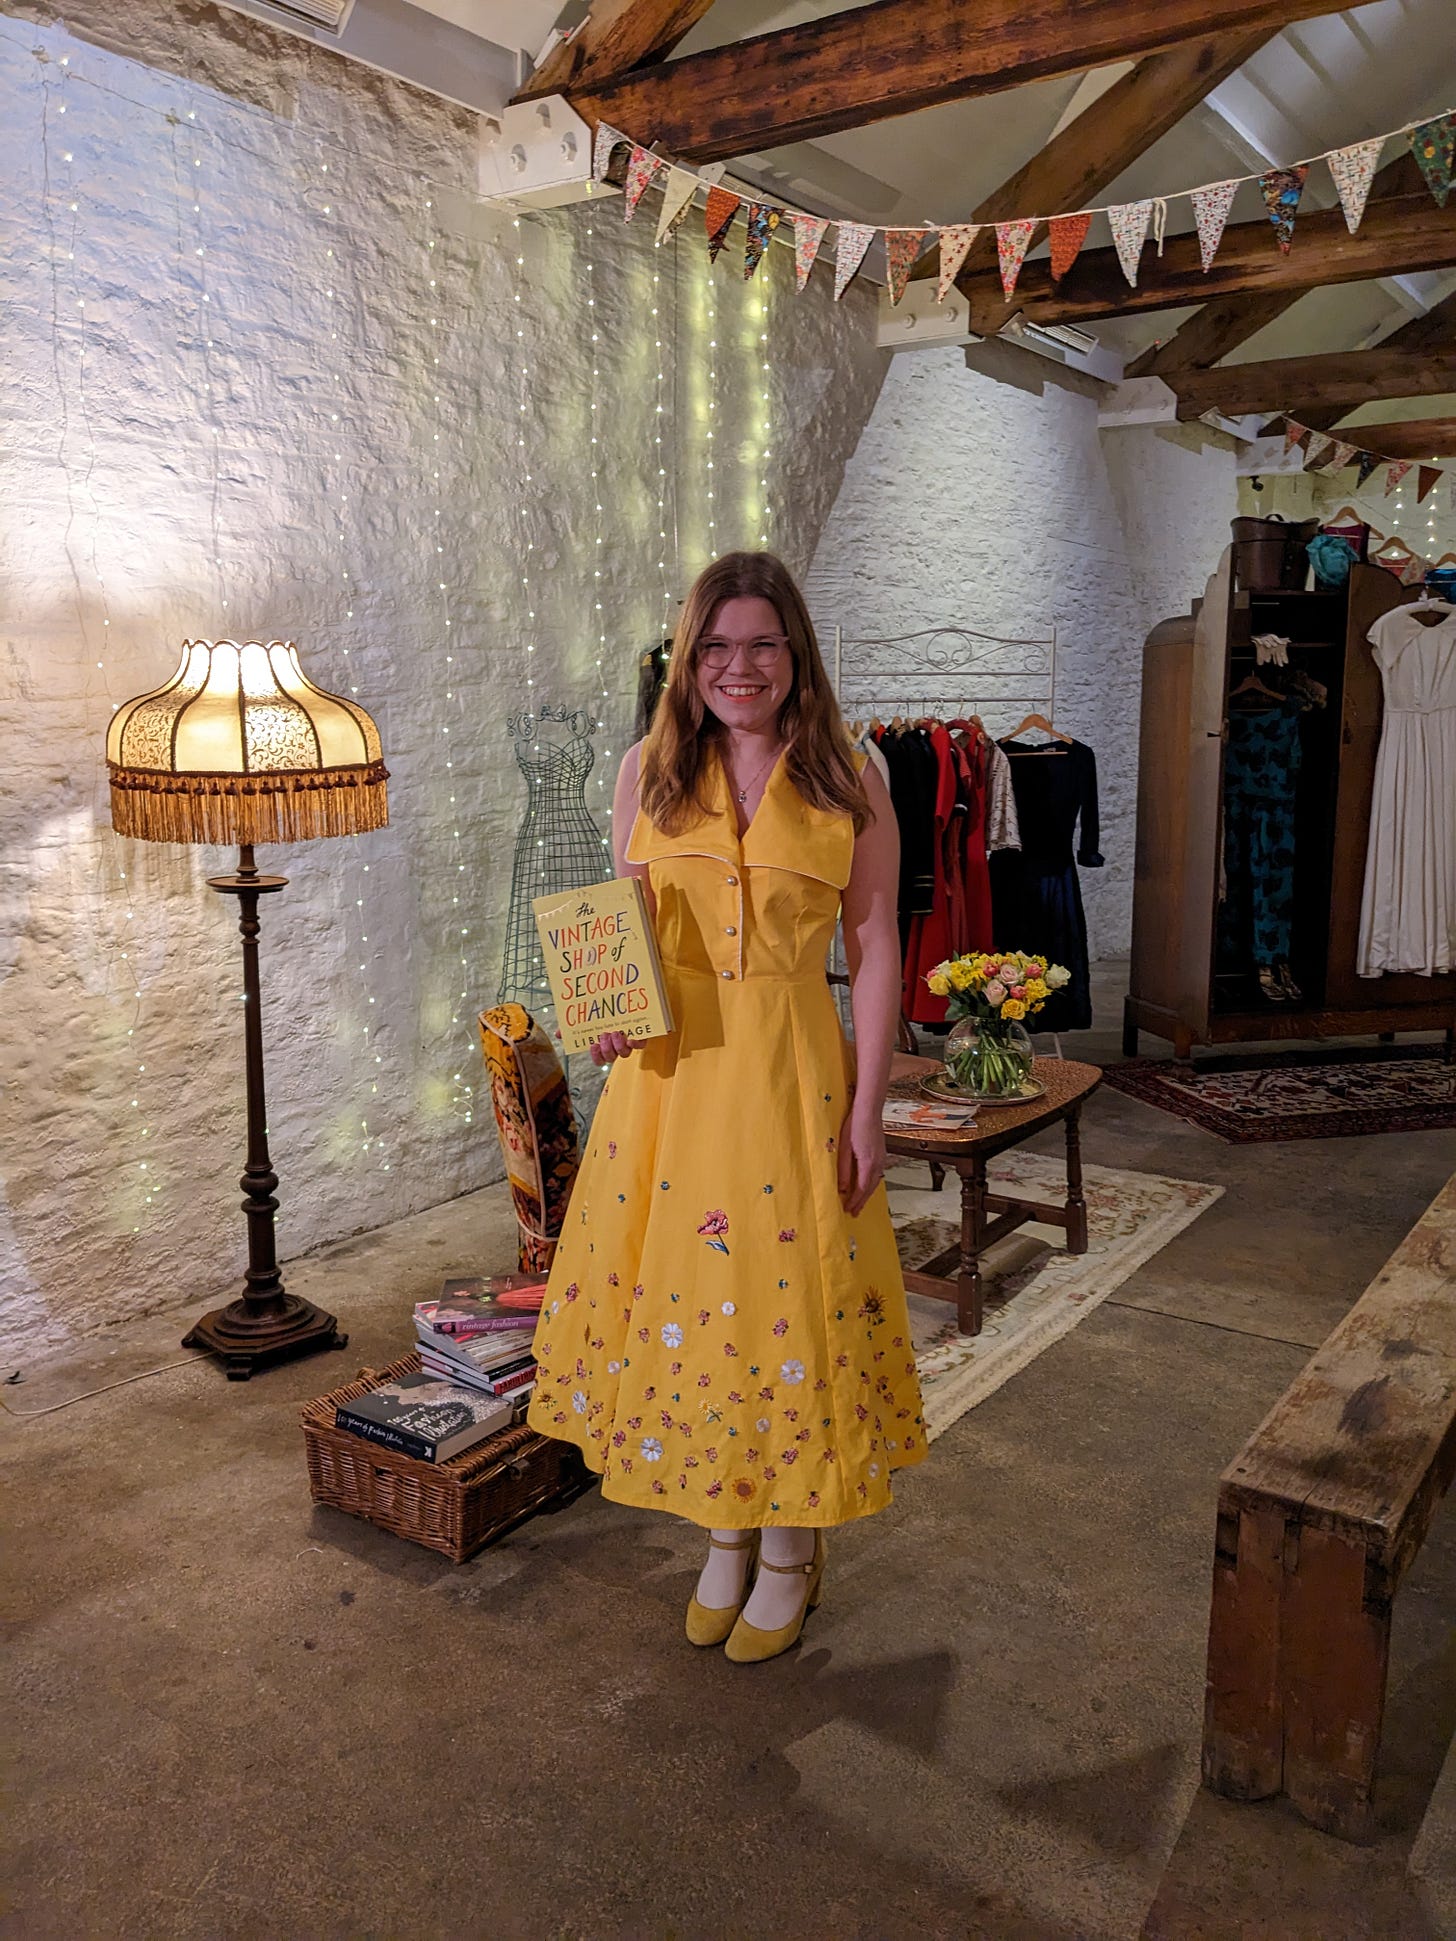 Libby wearing a yellow vintage style dress covered in flowers, holding a copy of her book The Vintage Shop of Second Chances.